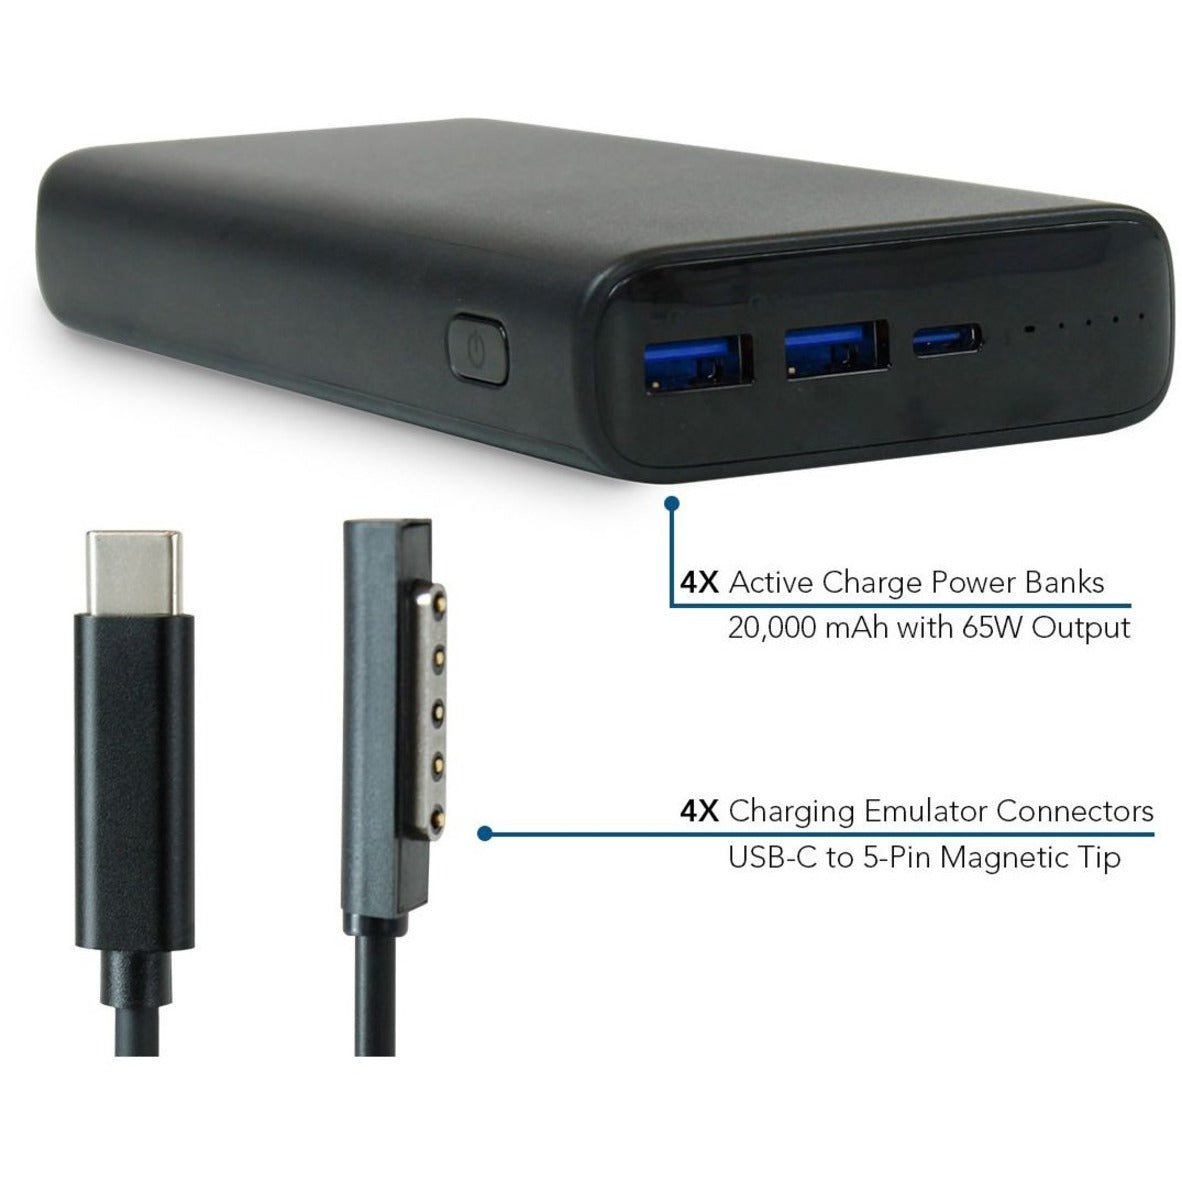 JAR Systems A4USBC2YPBSF2 Adapt4 USB-C Charging Station Active Charge Upgrade with Microsoft Connectors, Lifetime Warranty, Surface Compatibility